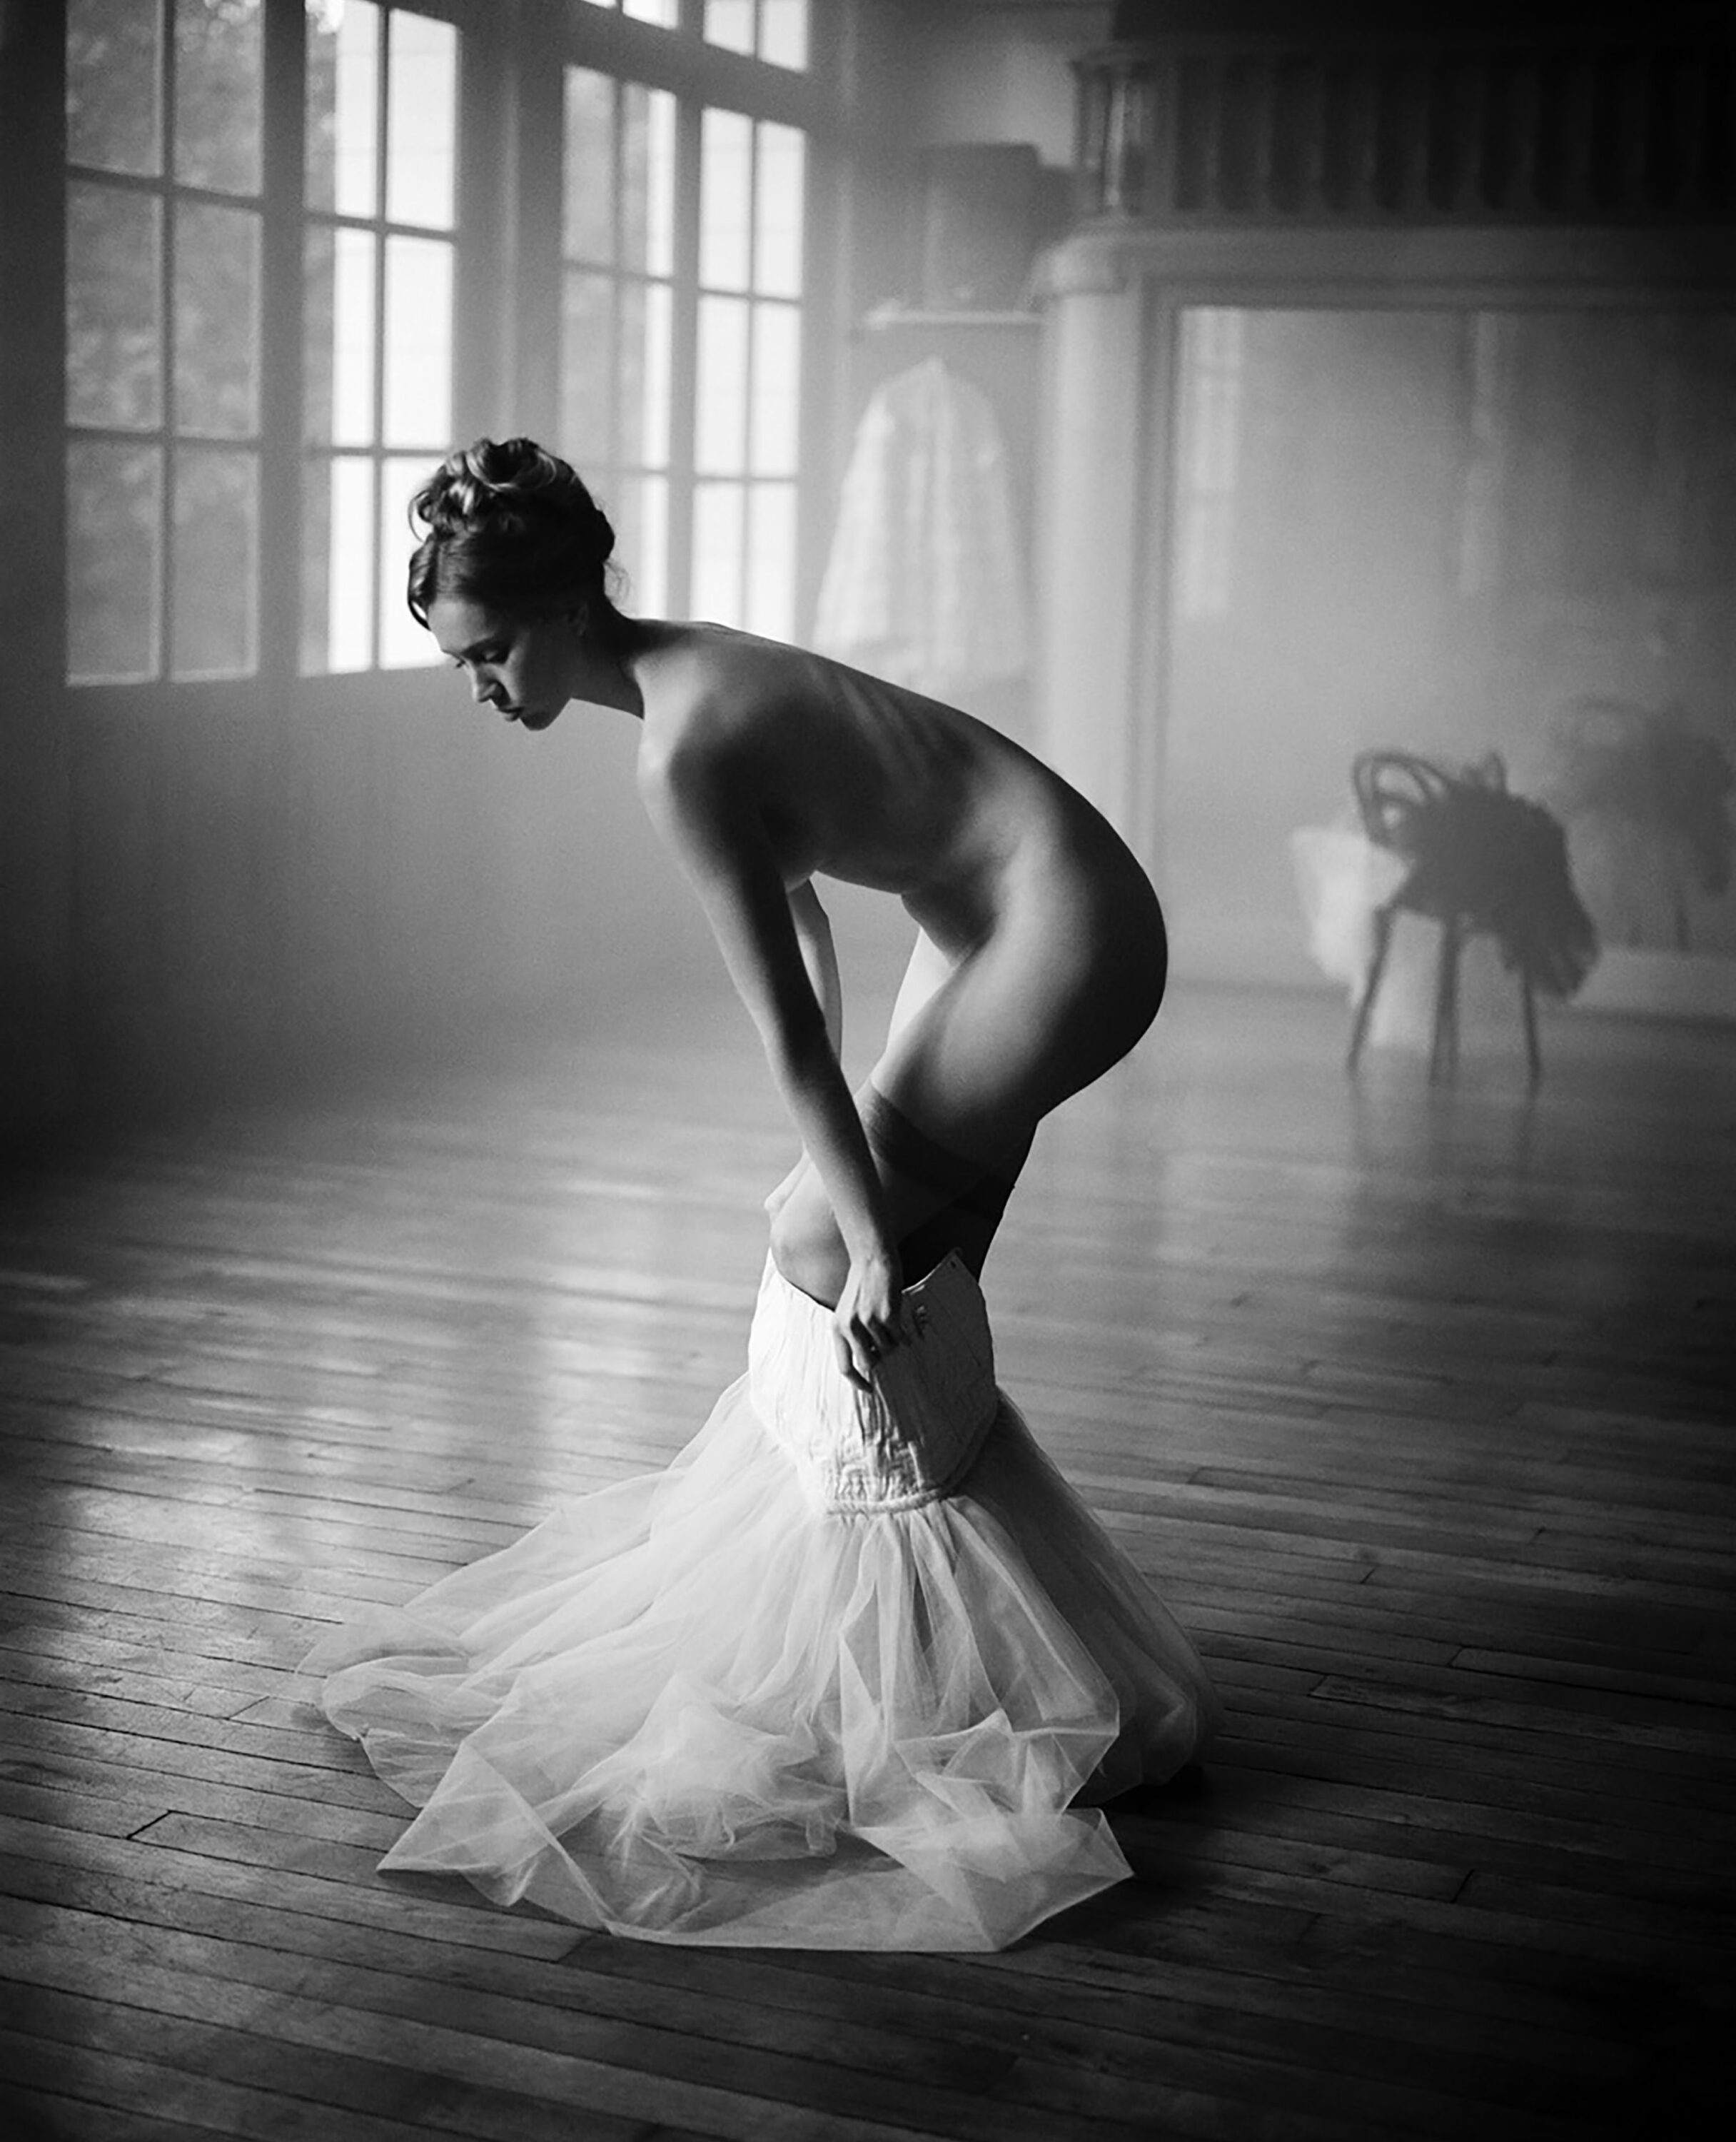 WREN-Vincent-Peters-Timeless-Time_2